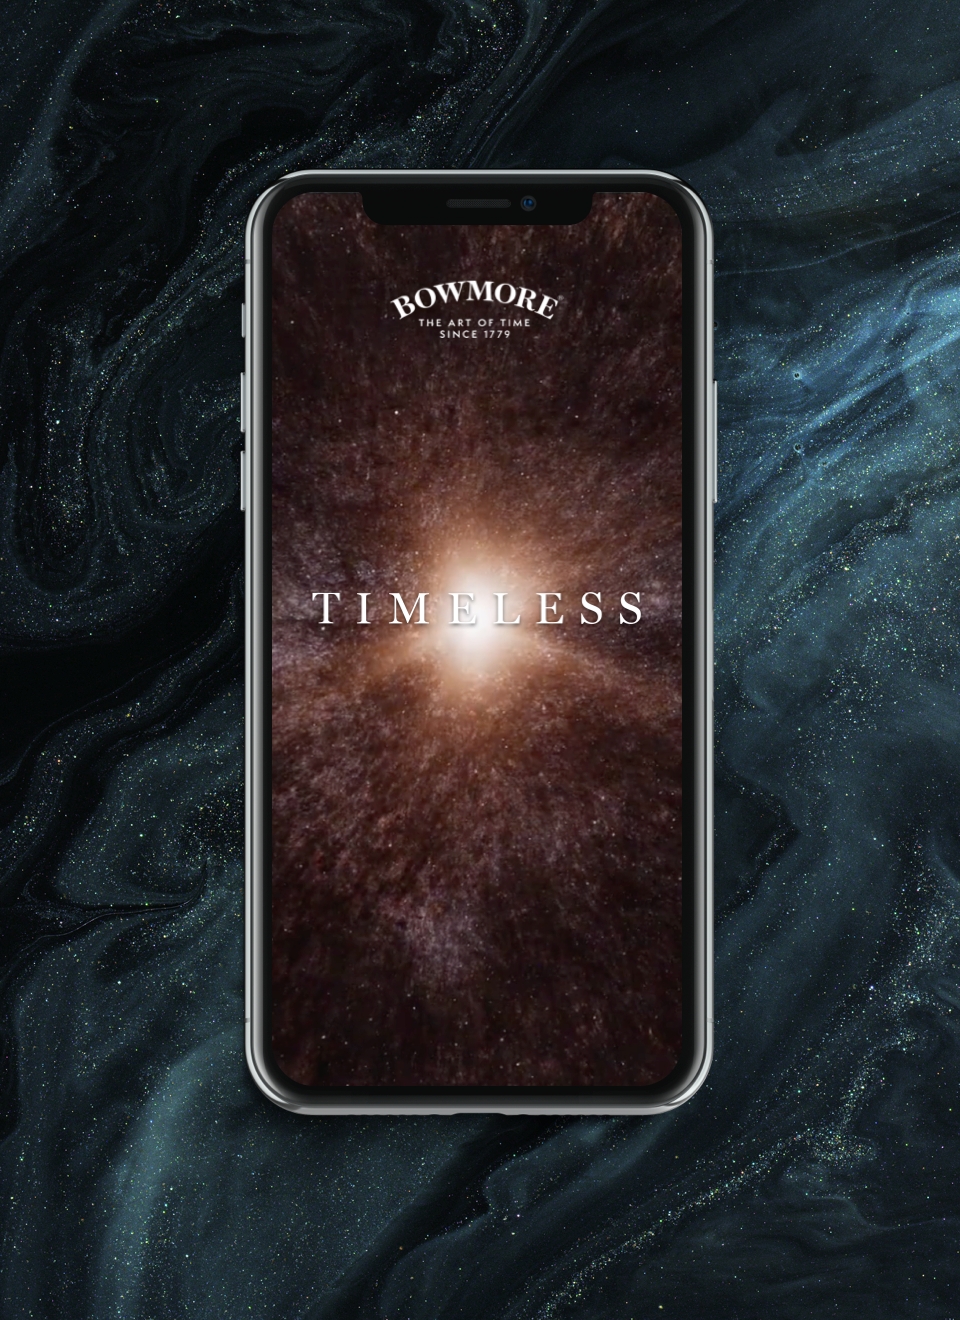 A mobile of "Bowmore Timeless" with a space background on the screen sits on a dark blue and green molten background